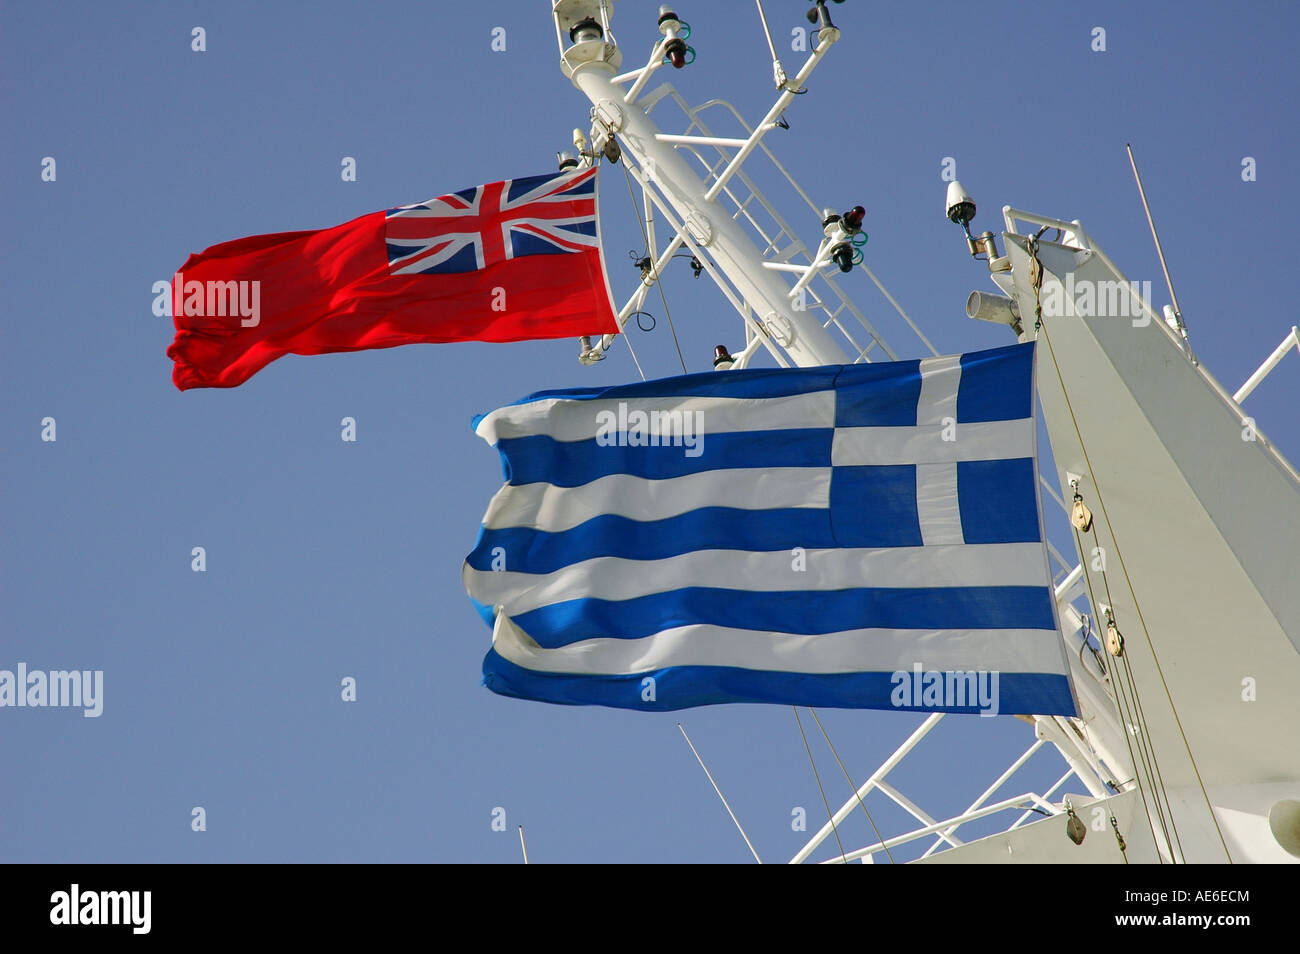 British merchant Red Ensign flag and Greek flags flying side by side on a cruise ship Stock Photo